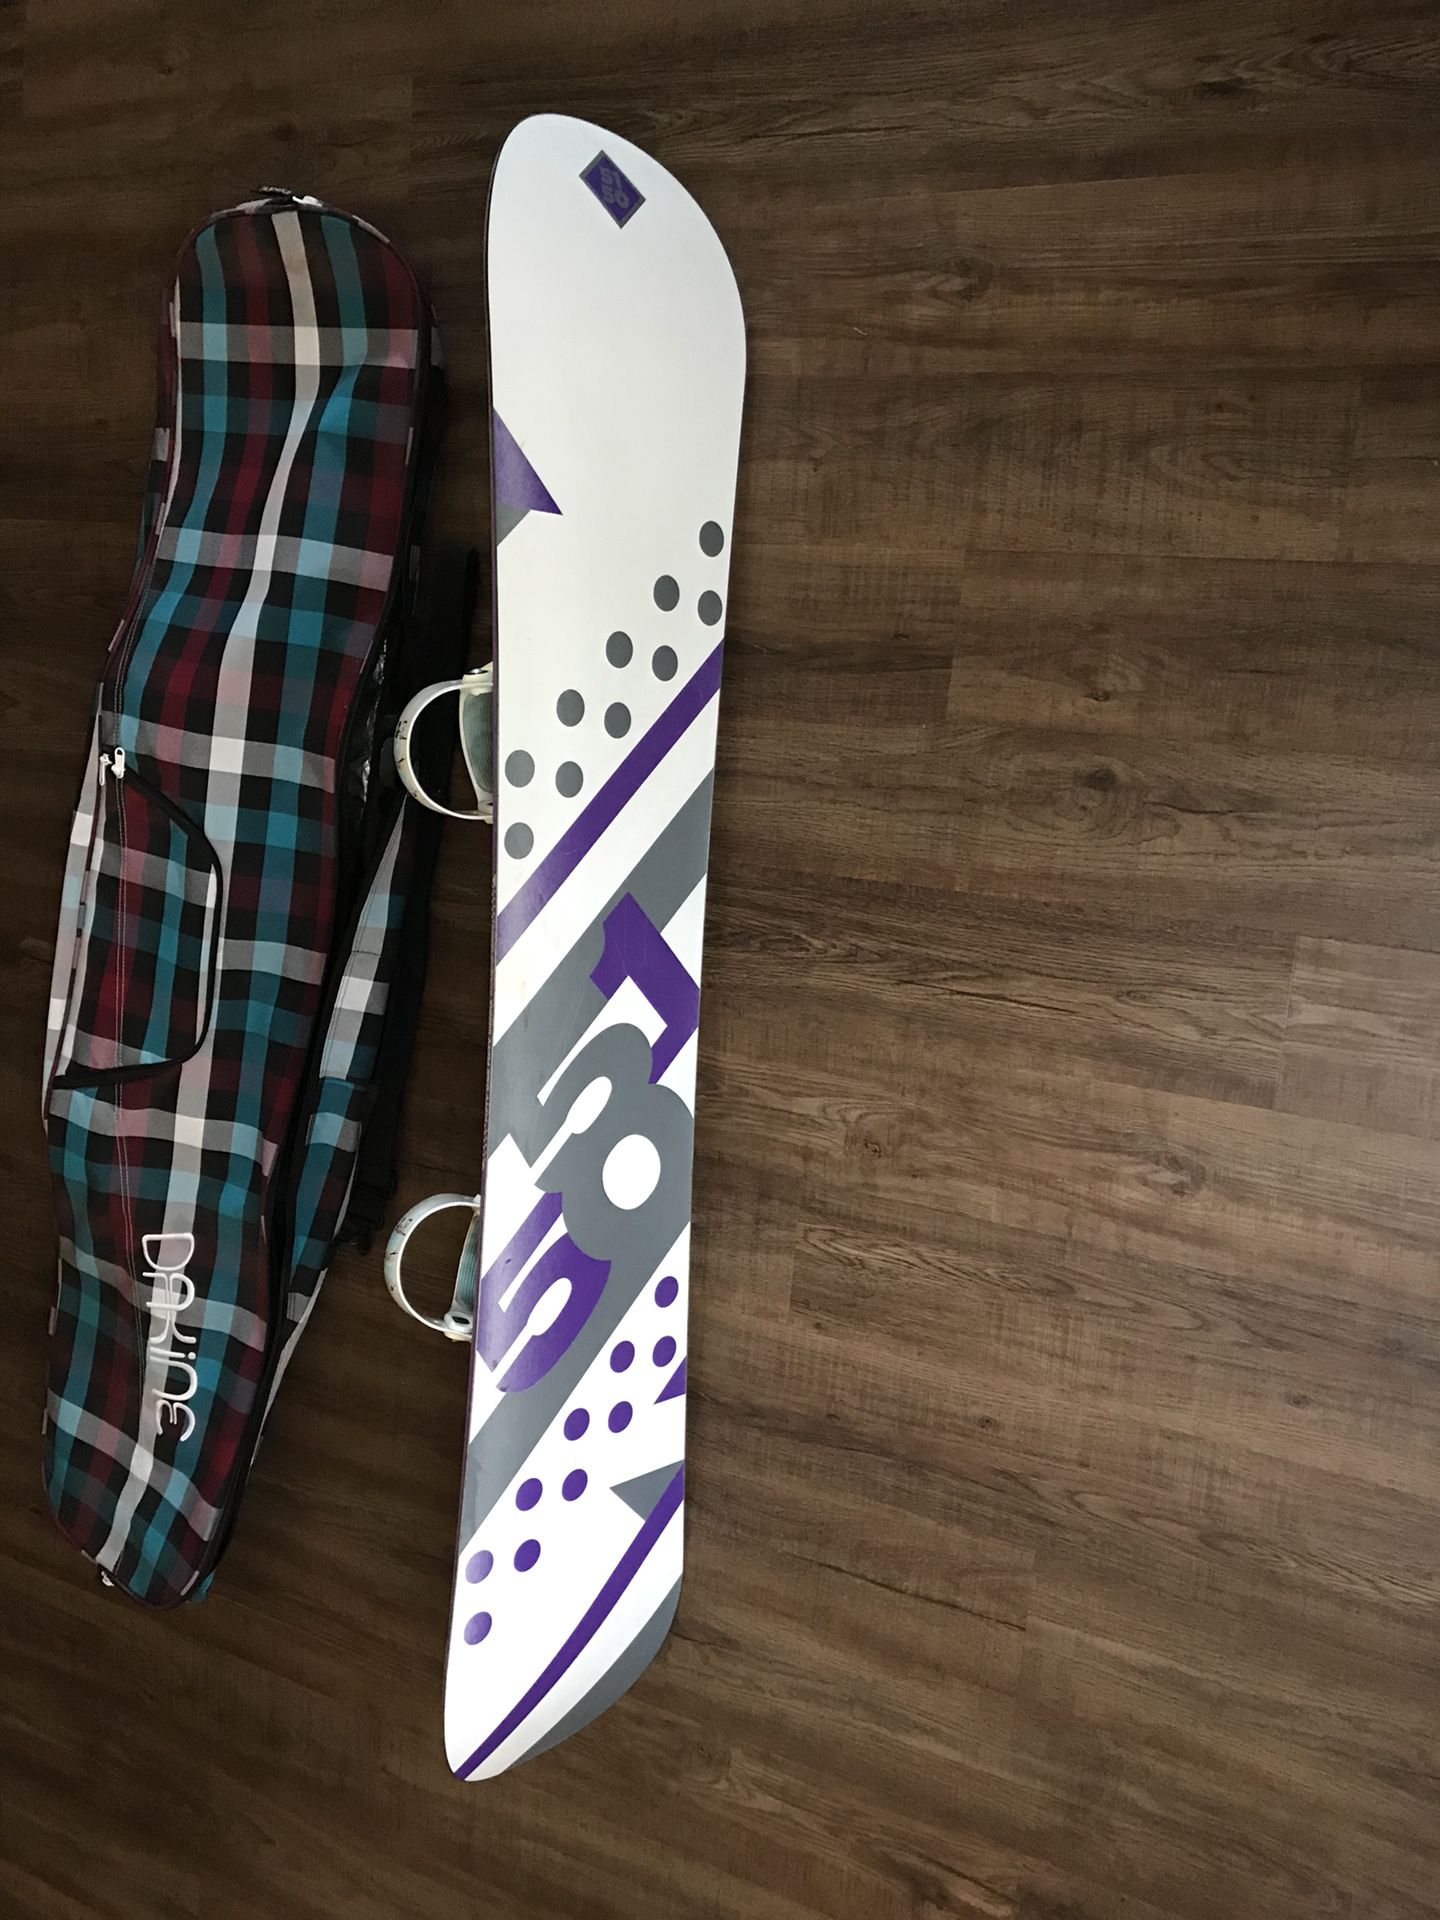 Women’s Snowboard and Ride bindings and bag $150